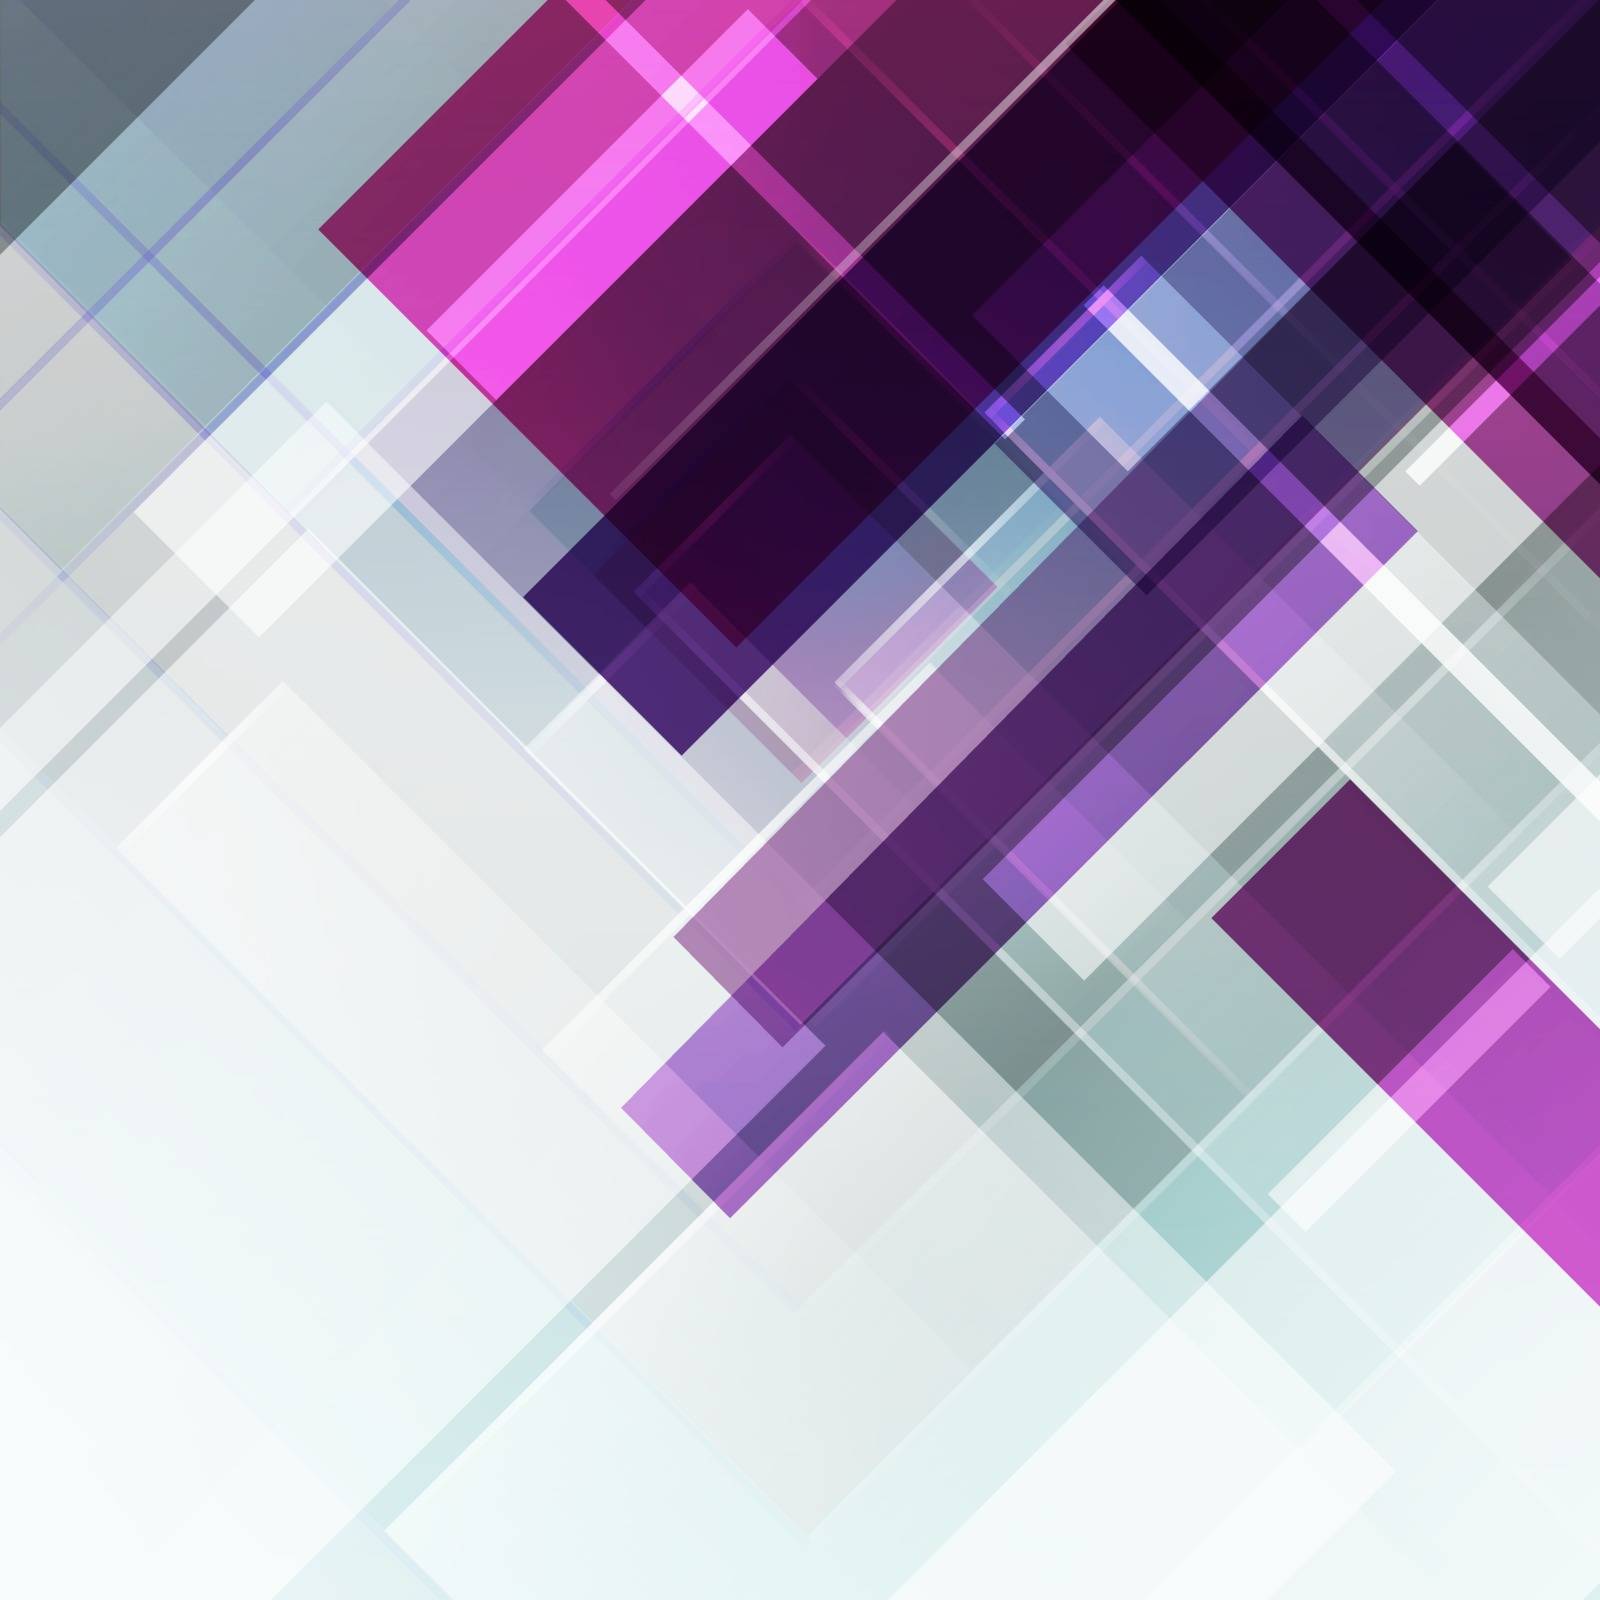 Abstract geometric violet background. Vector illustration. EPS 10